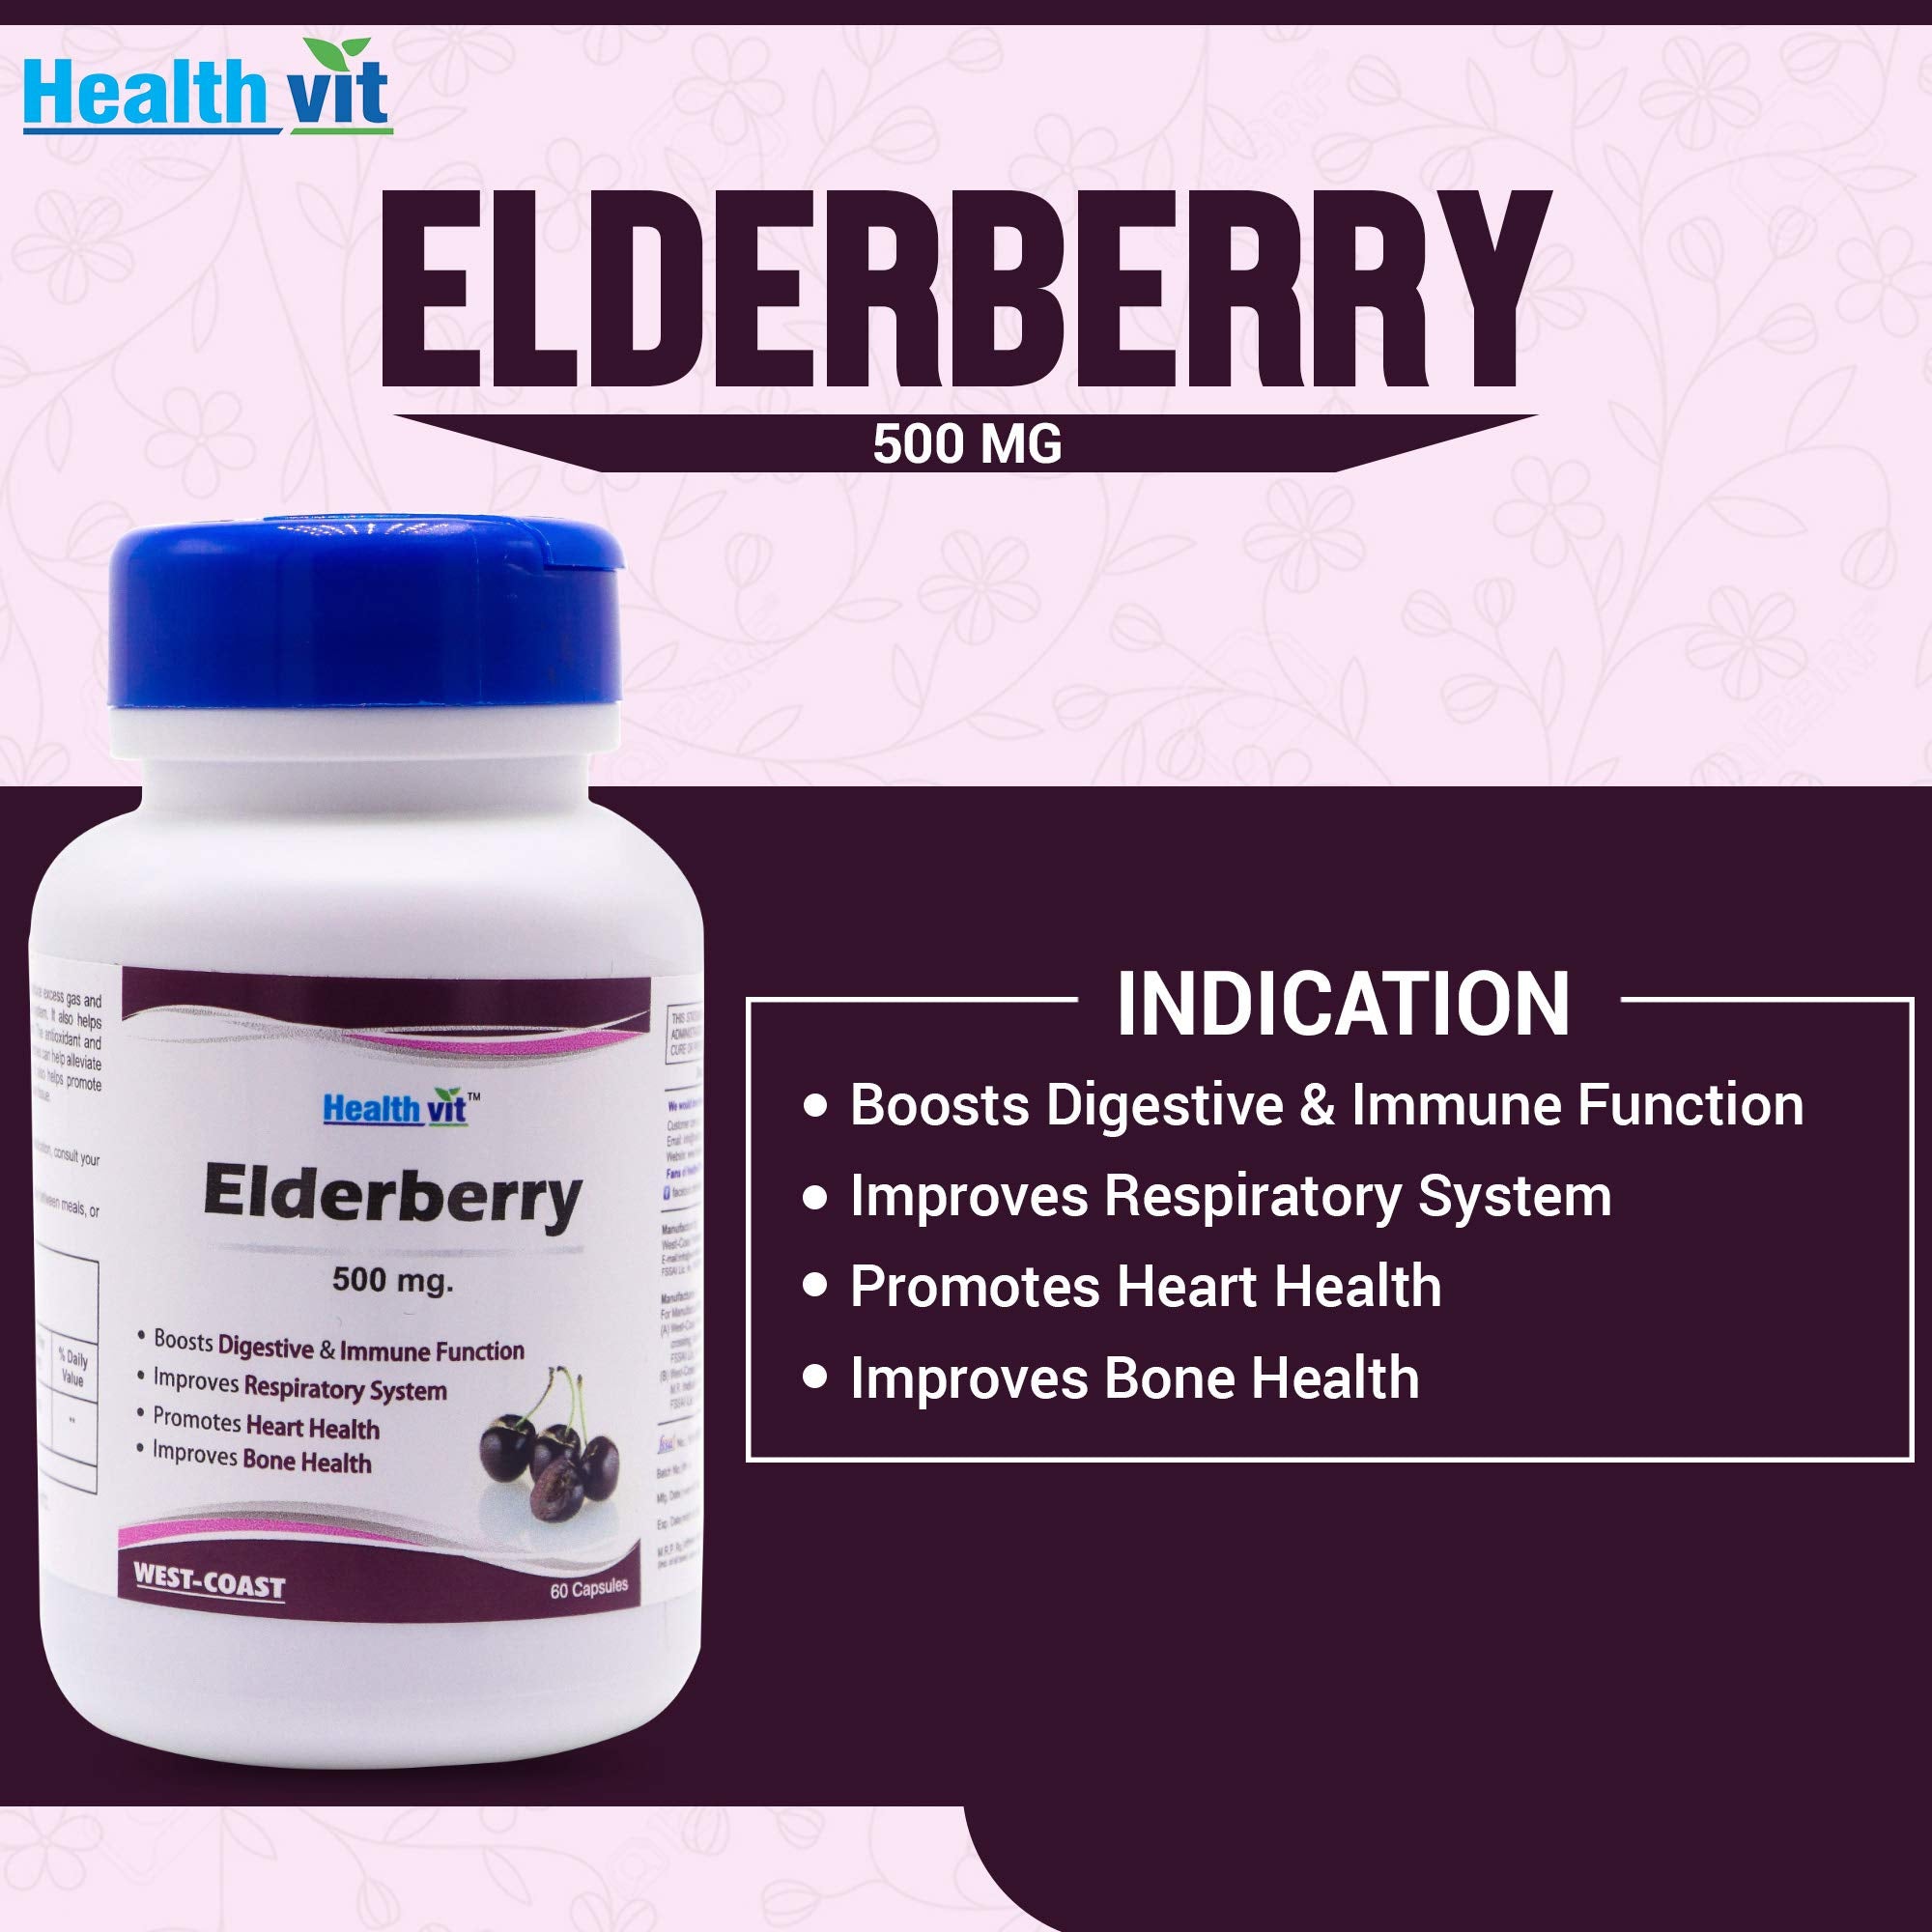 Healthvit Elderberry 500mg For Healthy Immune System | Maintain Health And Well Being | Improves Raspiratory System | Vegan And Gluten Free | 60 Capsules